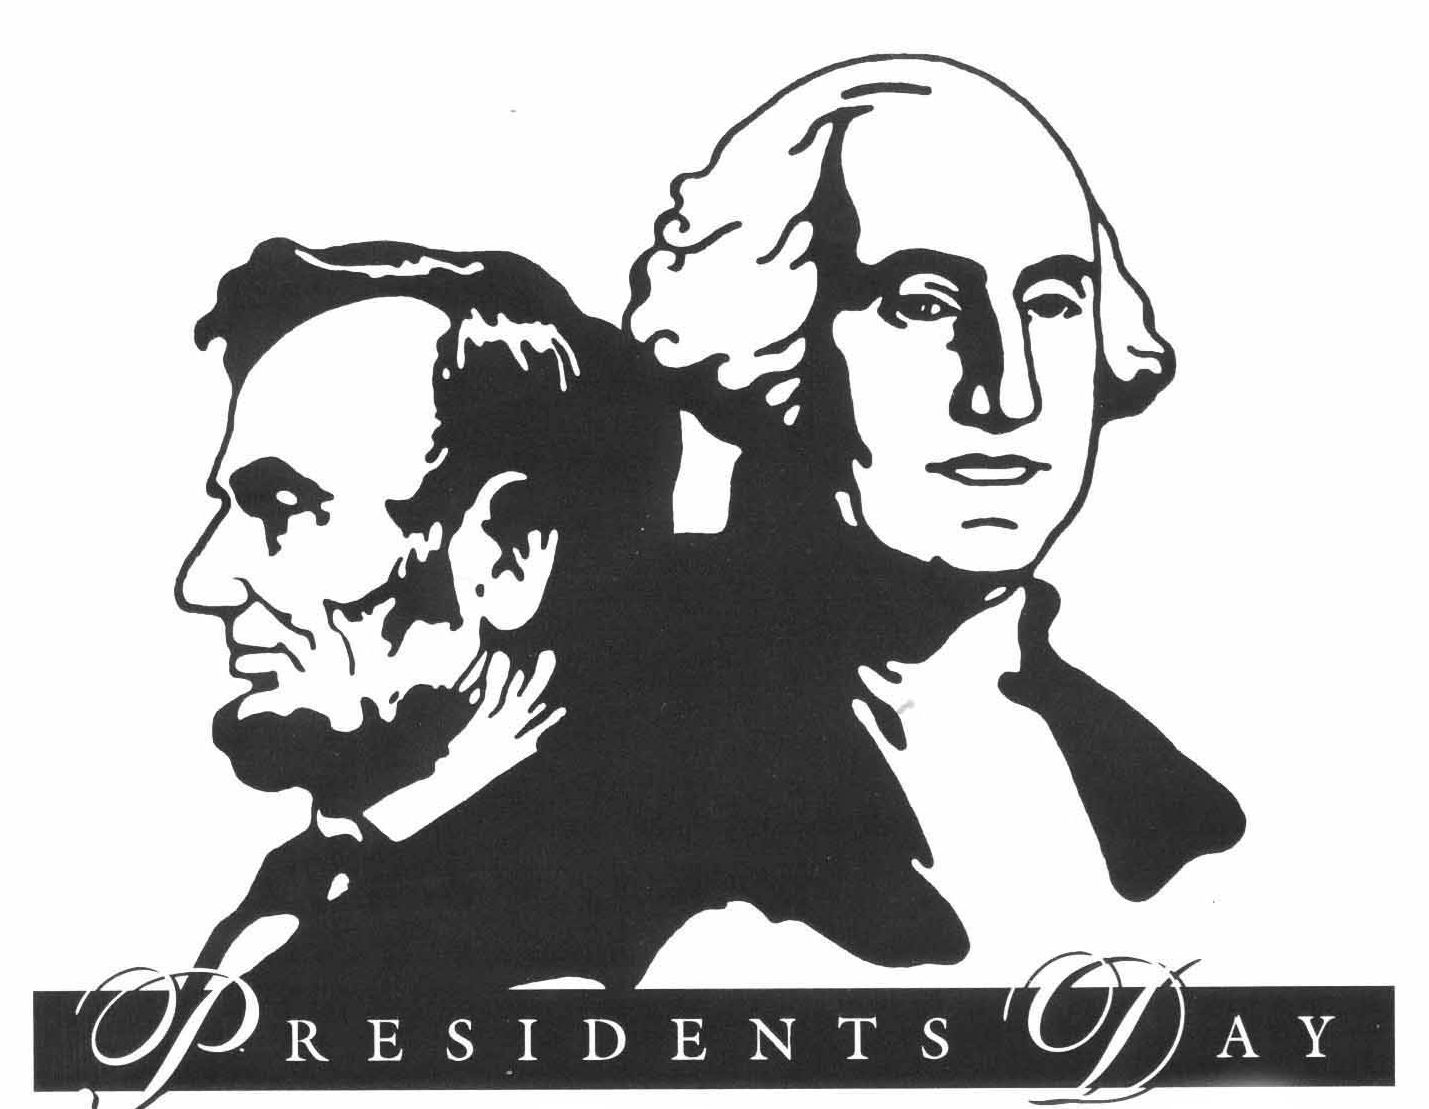  be closed on Monday, February 15, 2010 in observance of PRESIDENTS ...